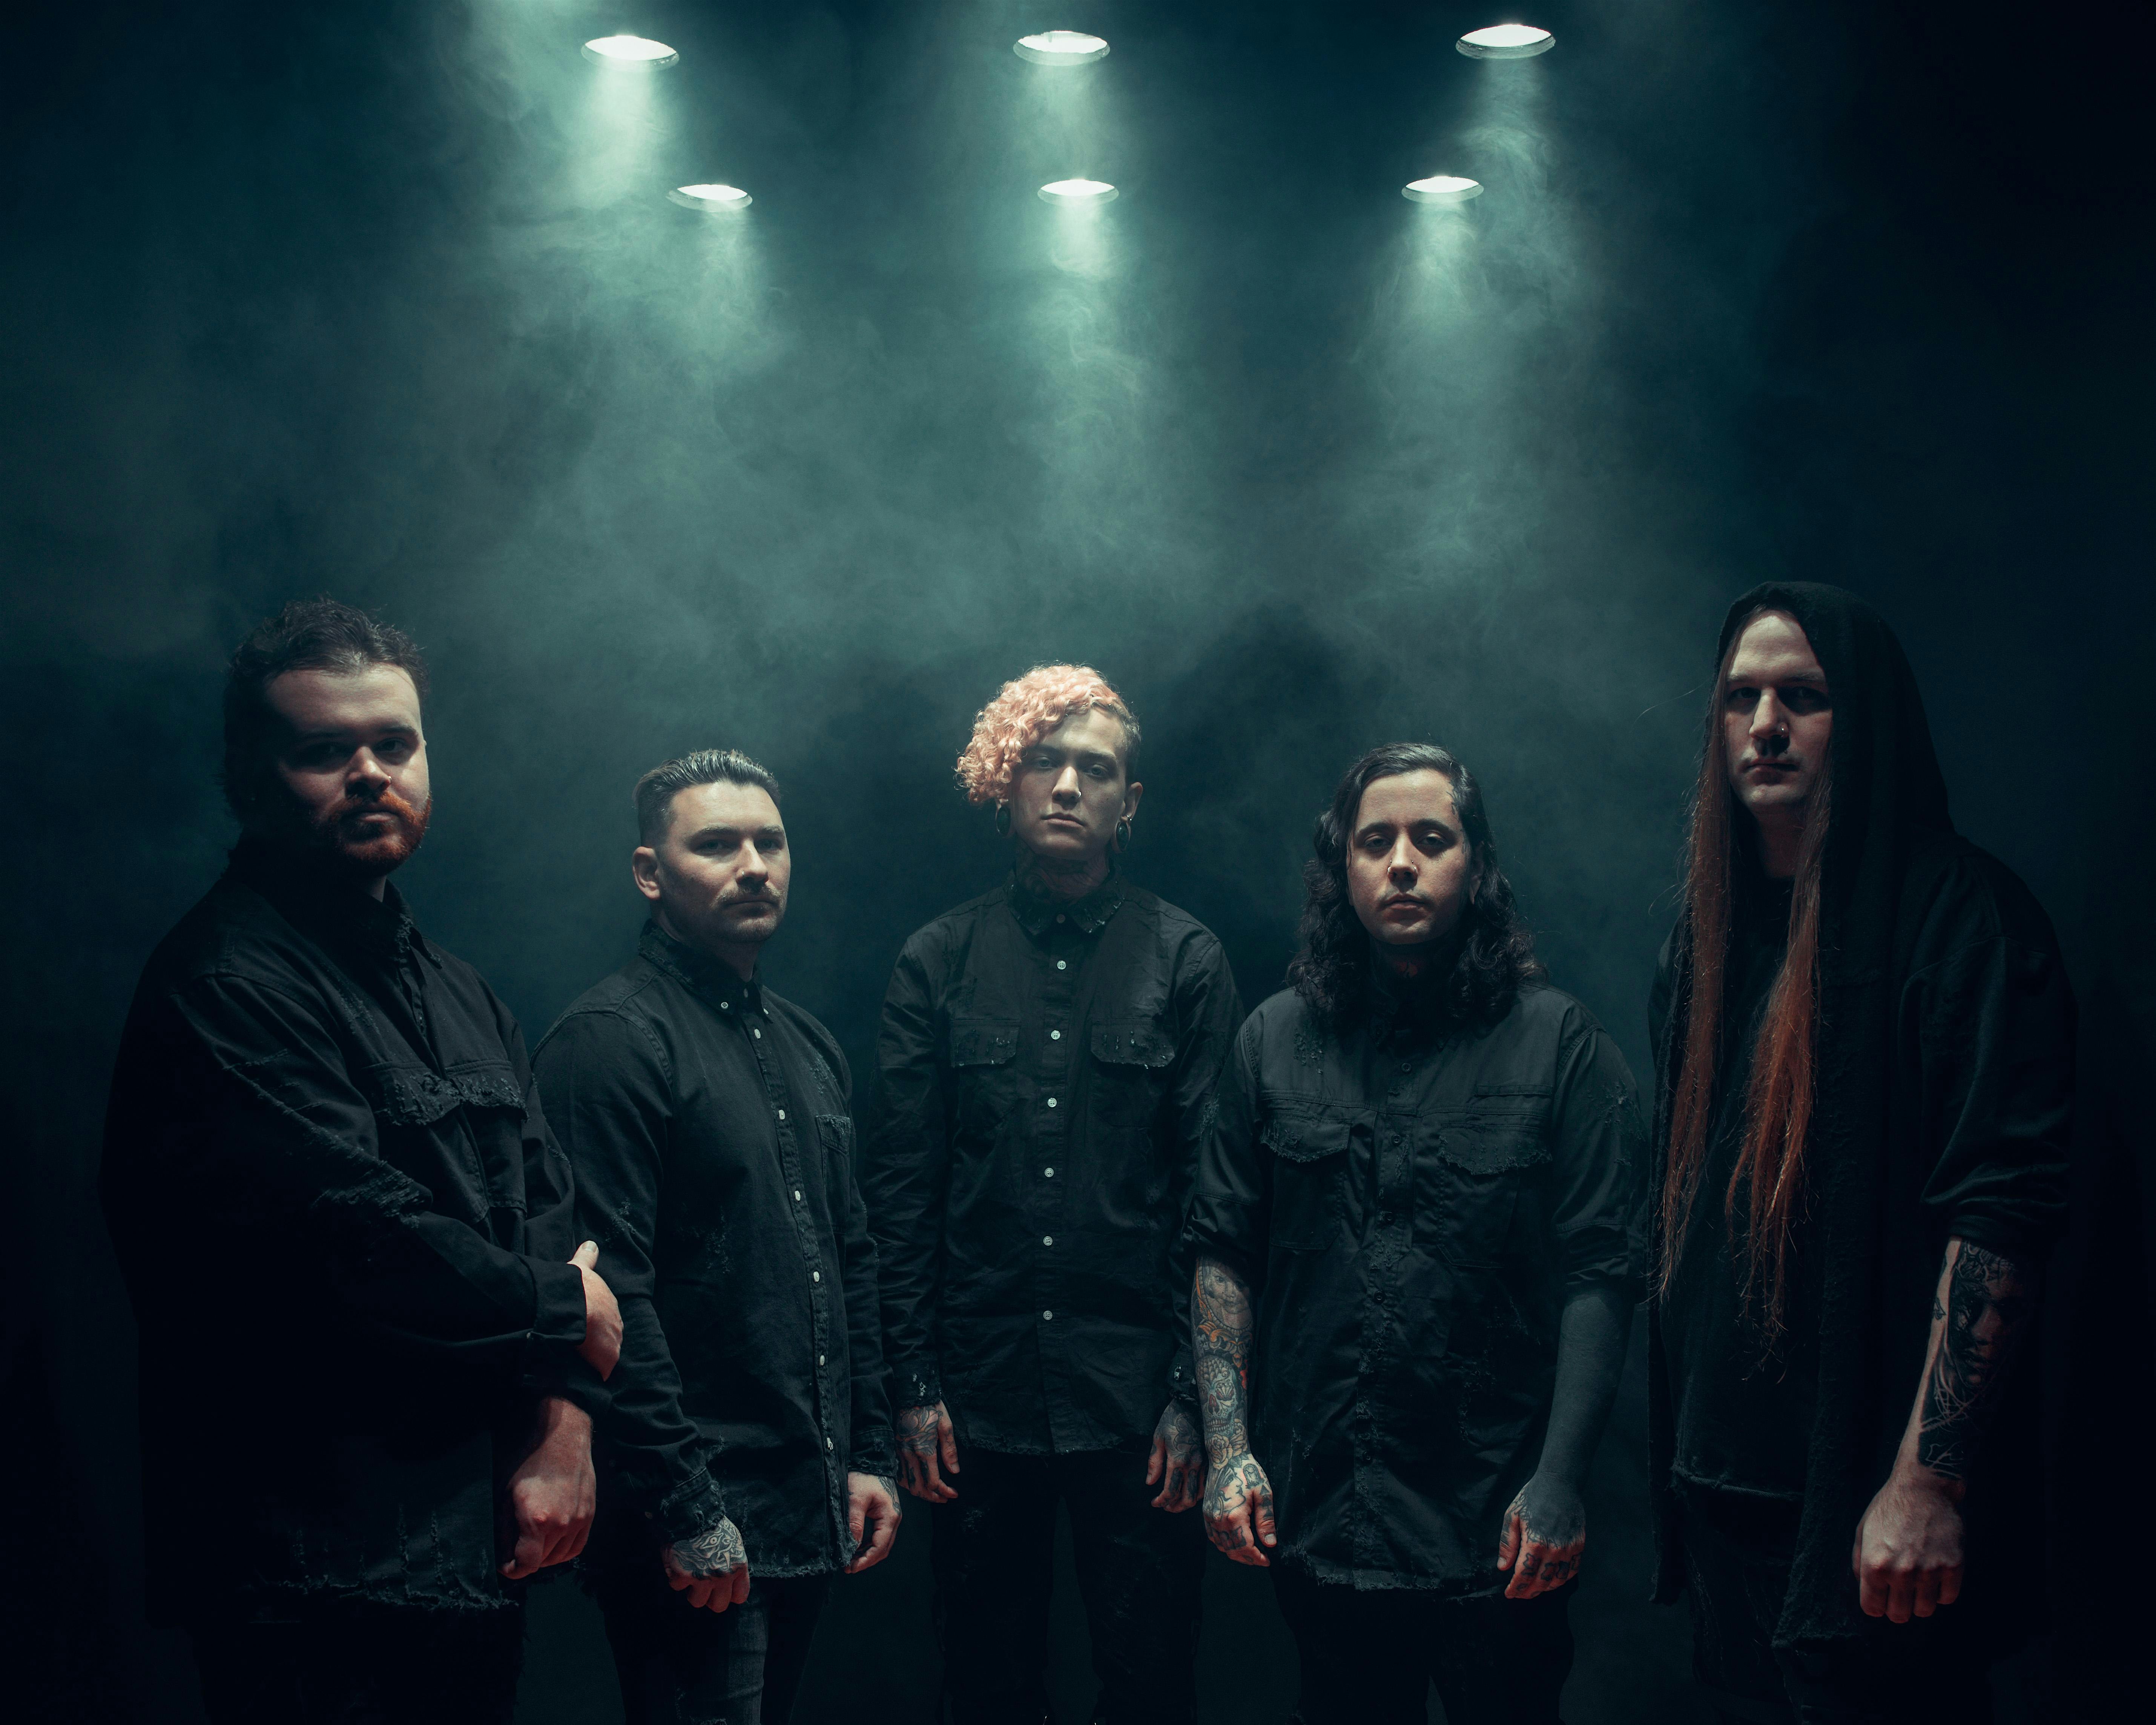 Lorna Shore, Shadow of Intent, Brand of Sacrifice, Bodysnatcher, and Boundaries in St. Petersburg at Jannus Live